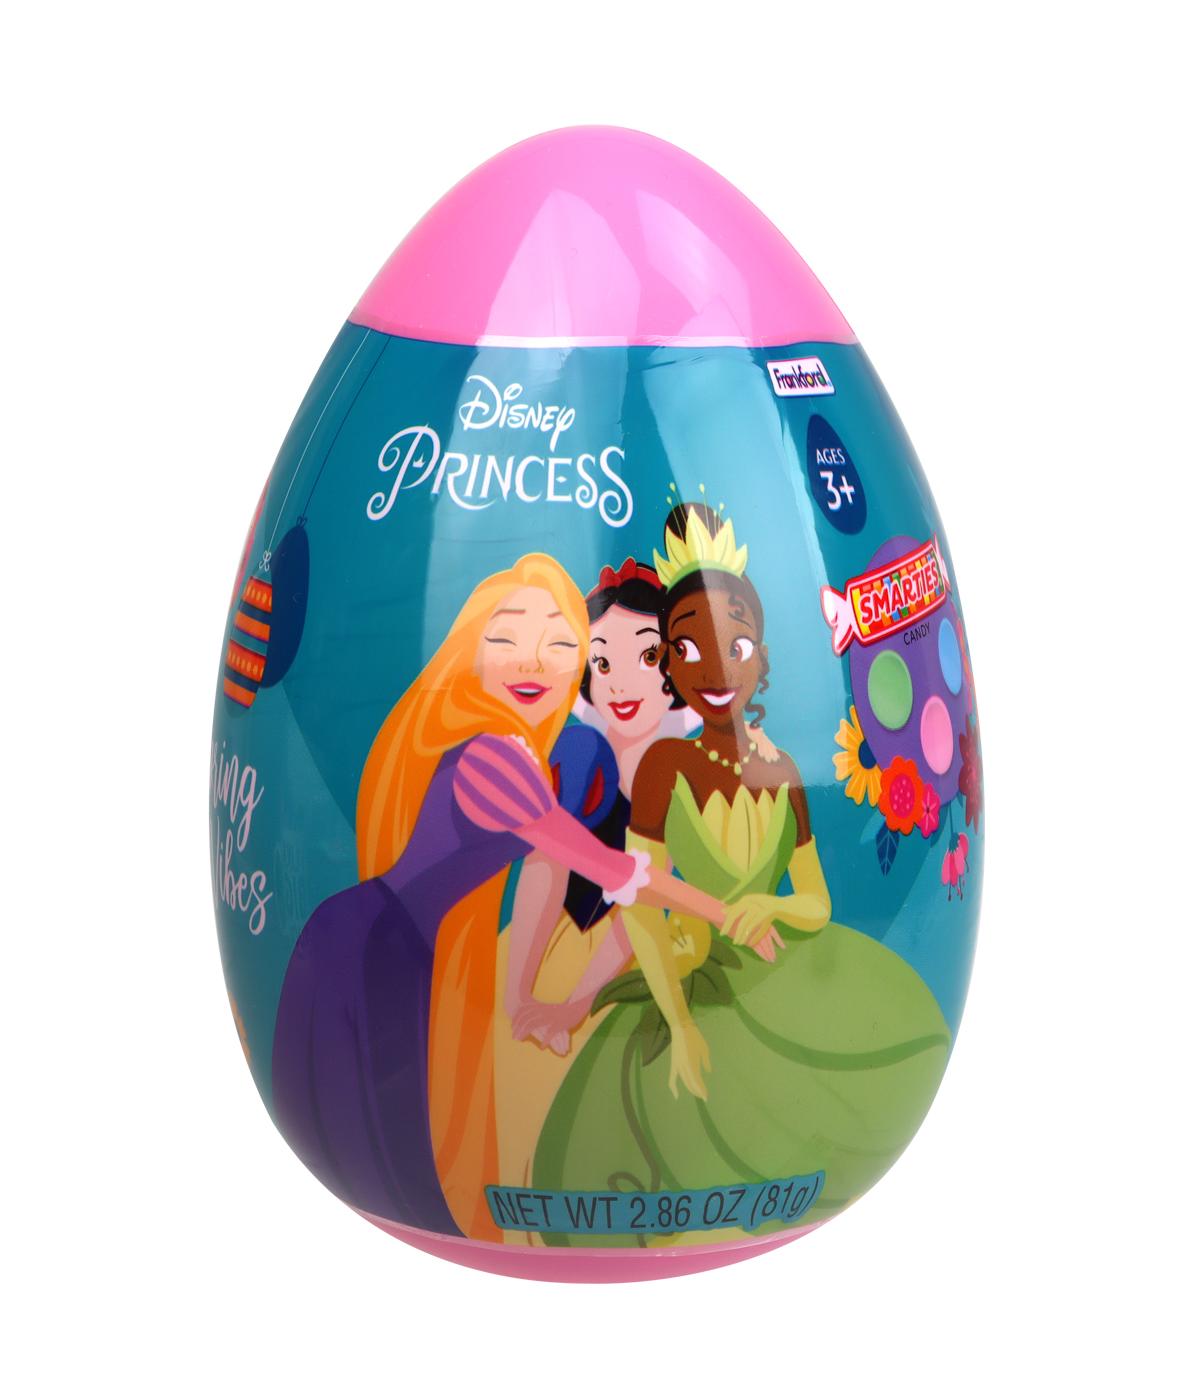 Frankford Disney Princess Smarties Candy Giant Easter Egg; image 1 of 2